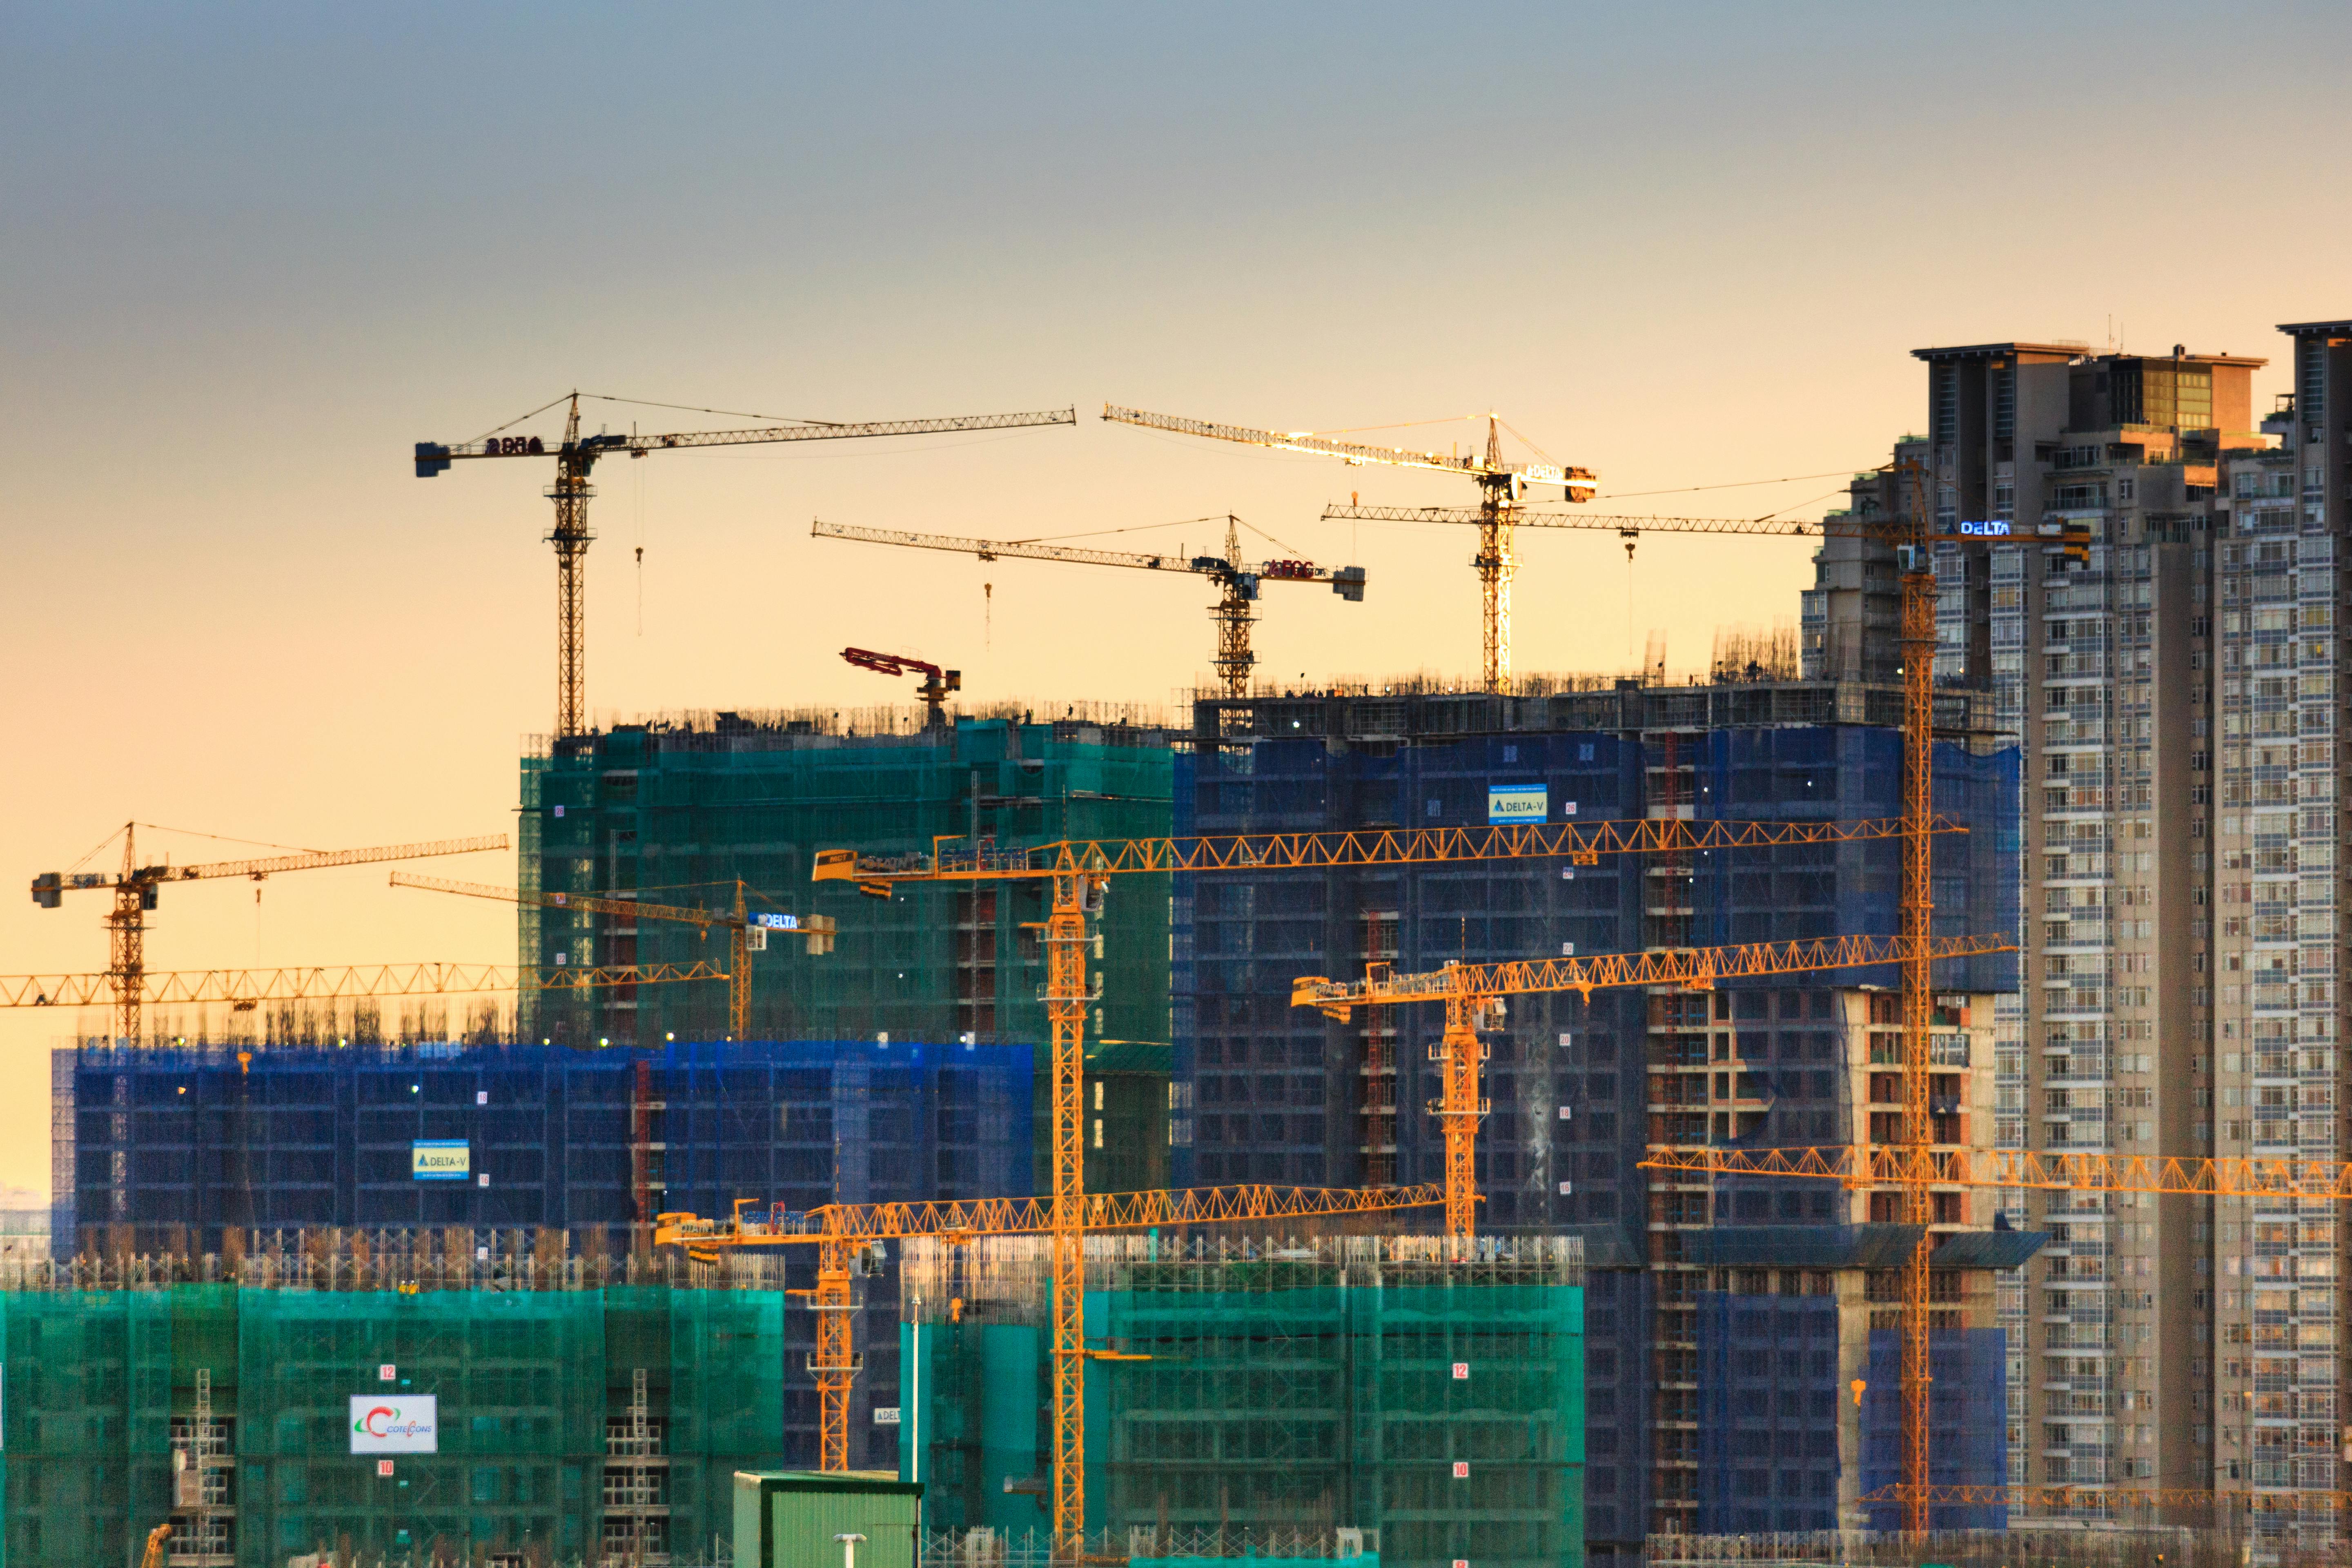 Construction costs stabilize as dwelling approvals hit 12-year low, CoreLogic report finds